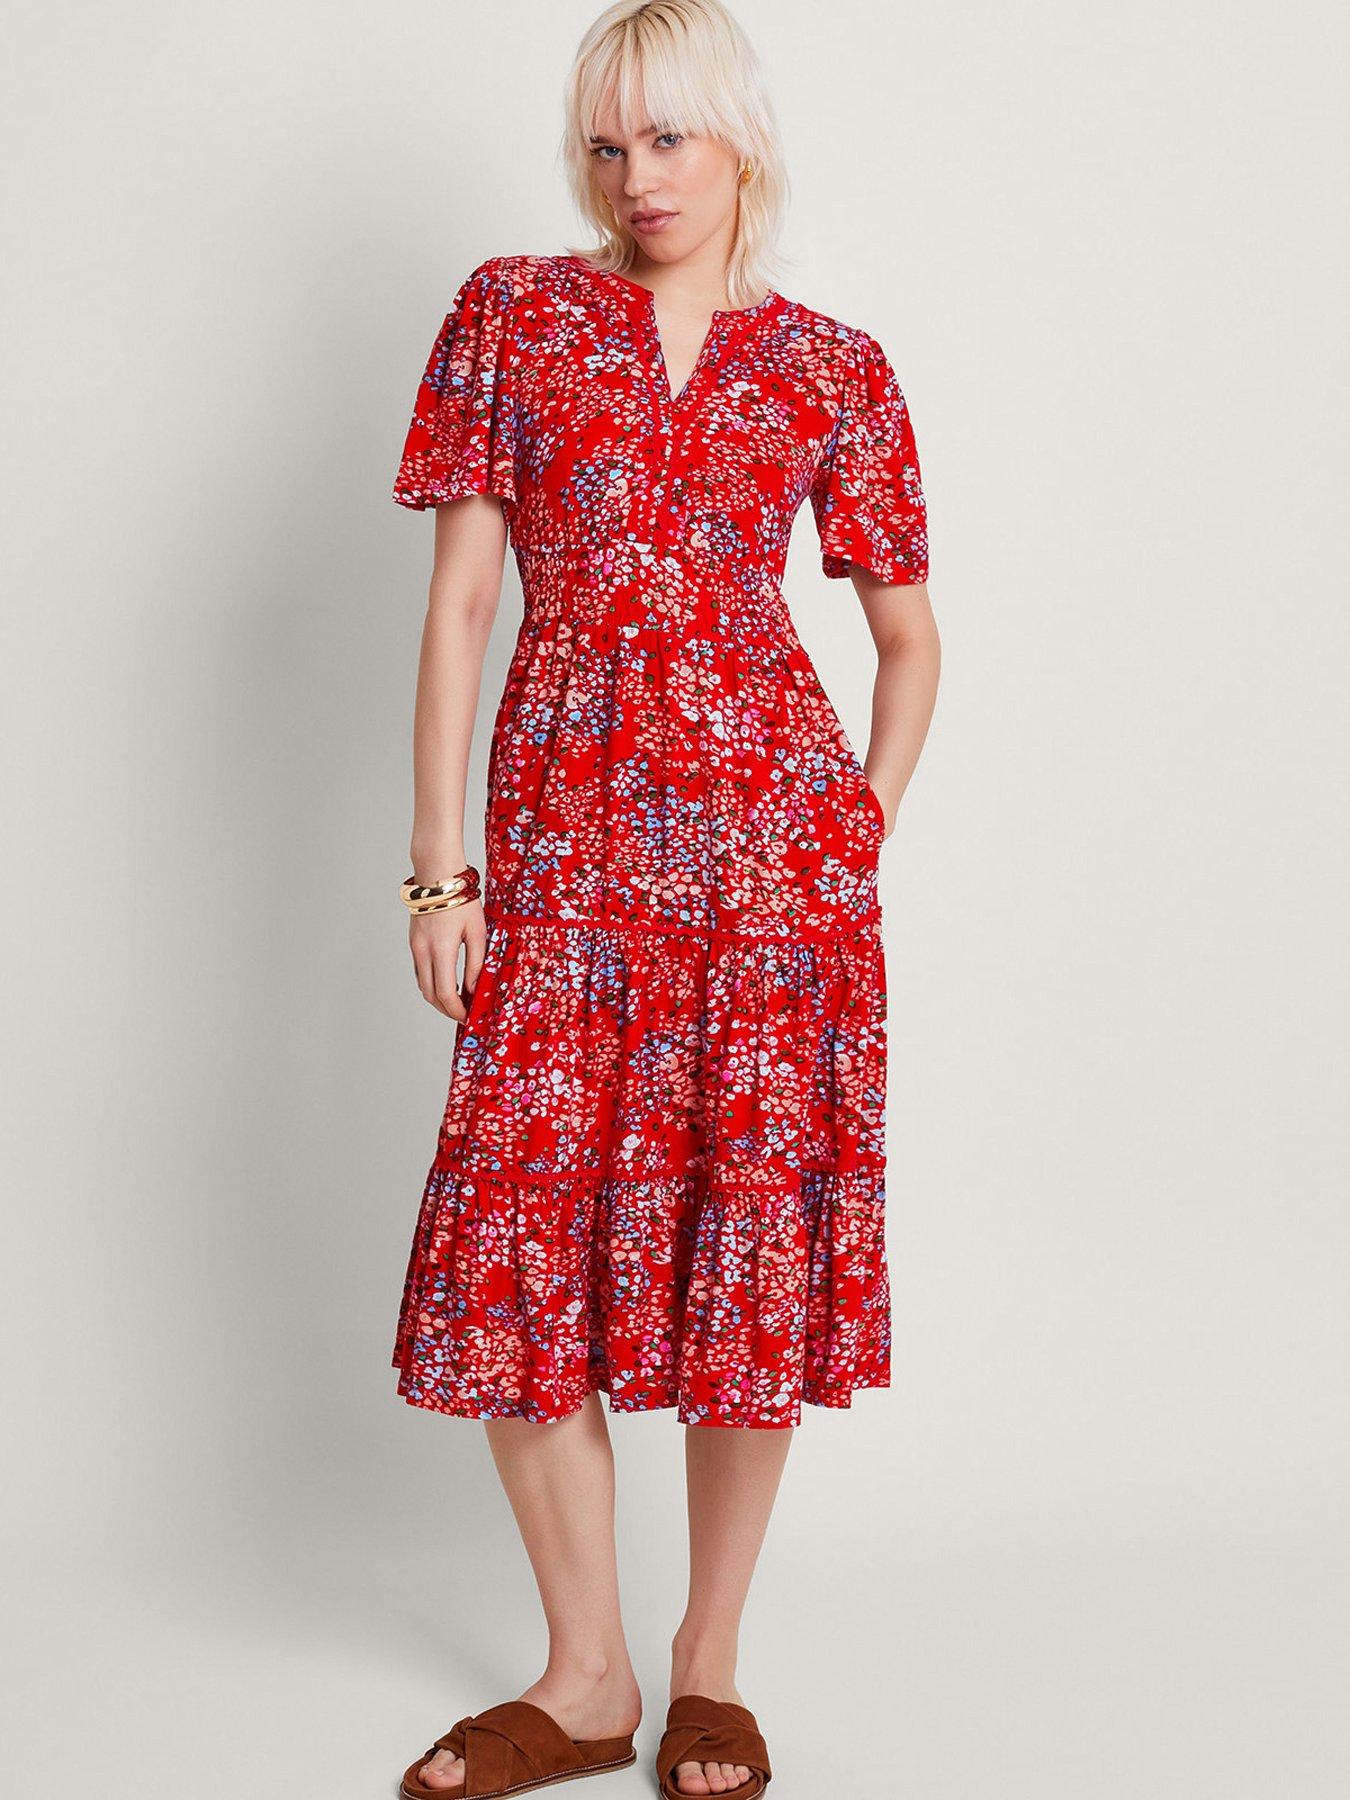 Monsoon Printed Tiered Cami Midi Dress in LENZING ECOVERO